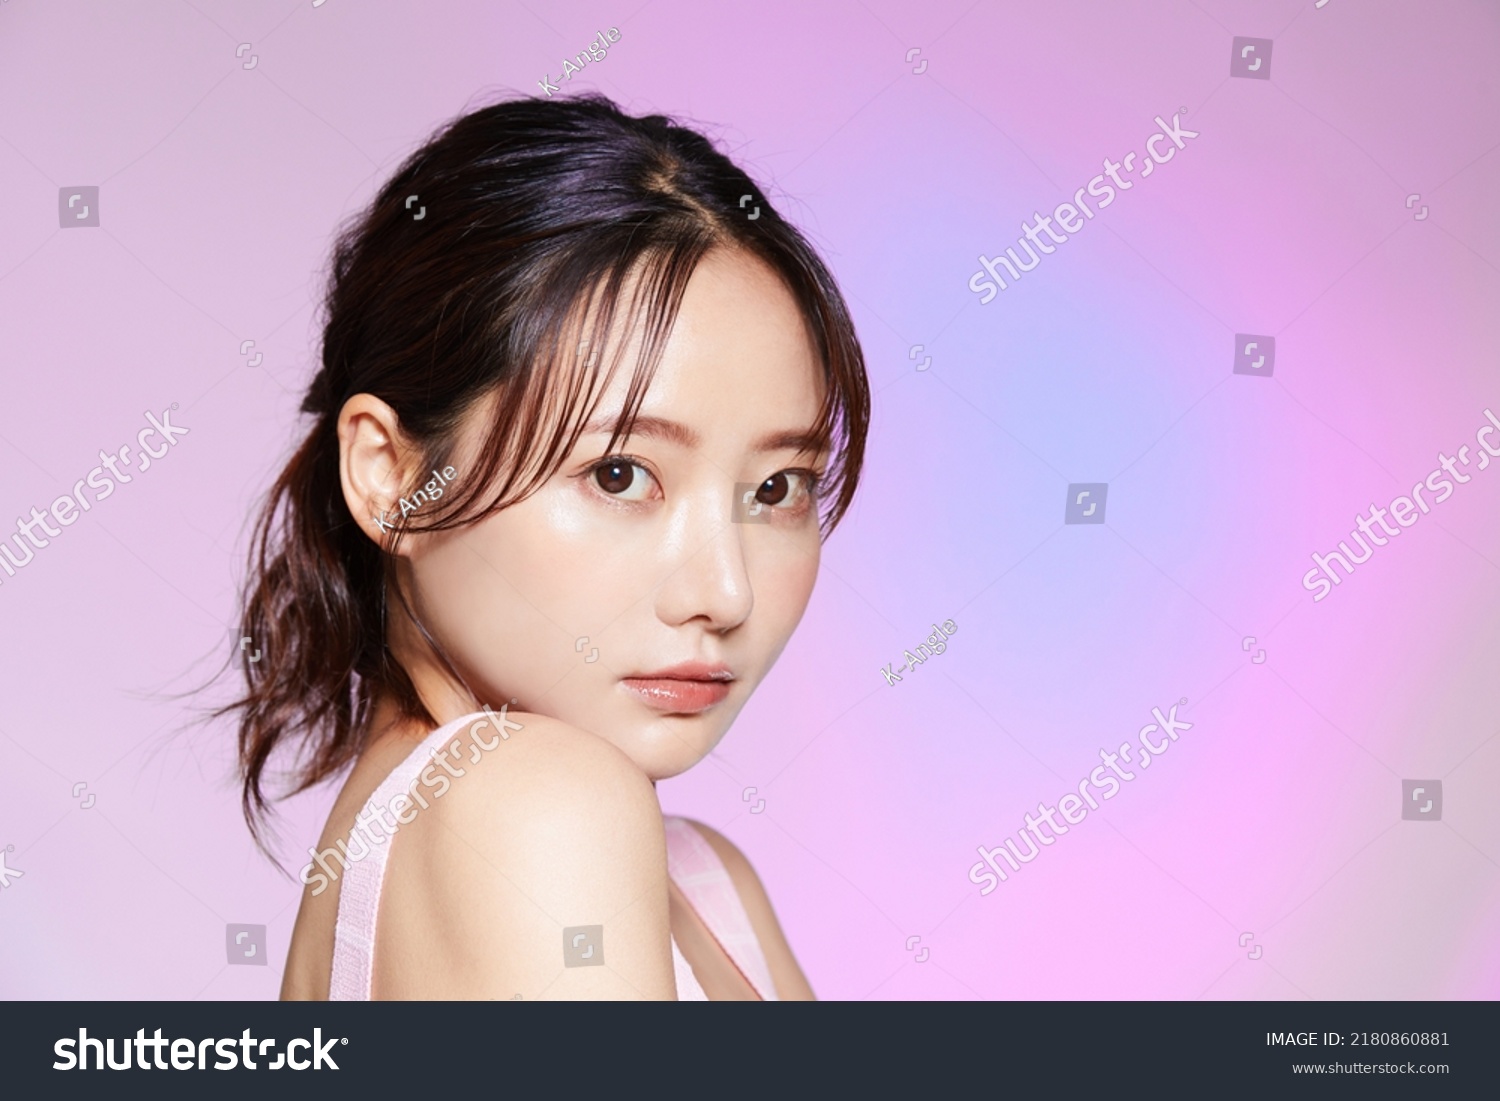 Beauty portrait of young Asian woman on colorful background #2180860881